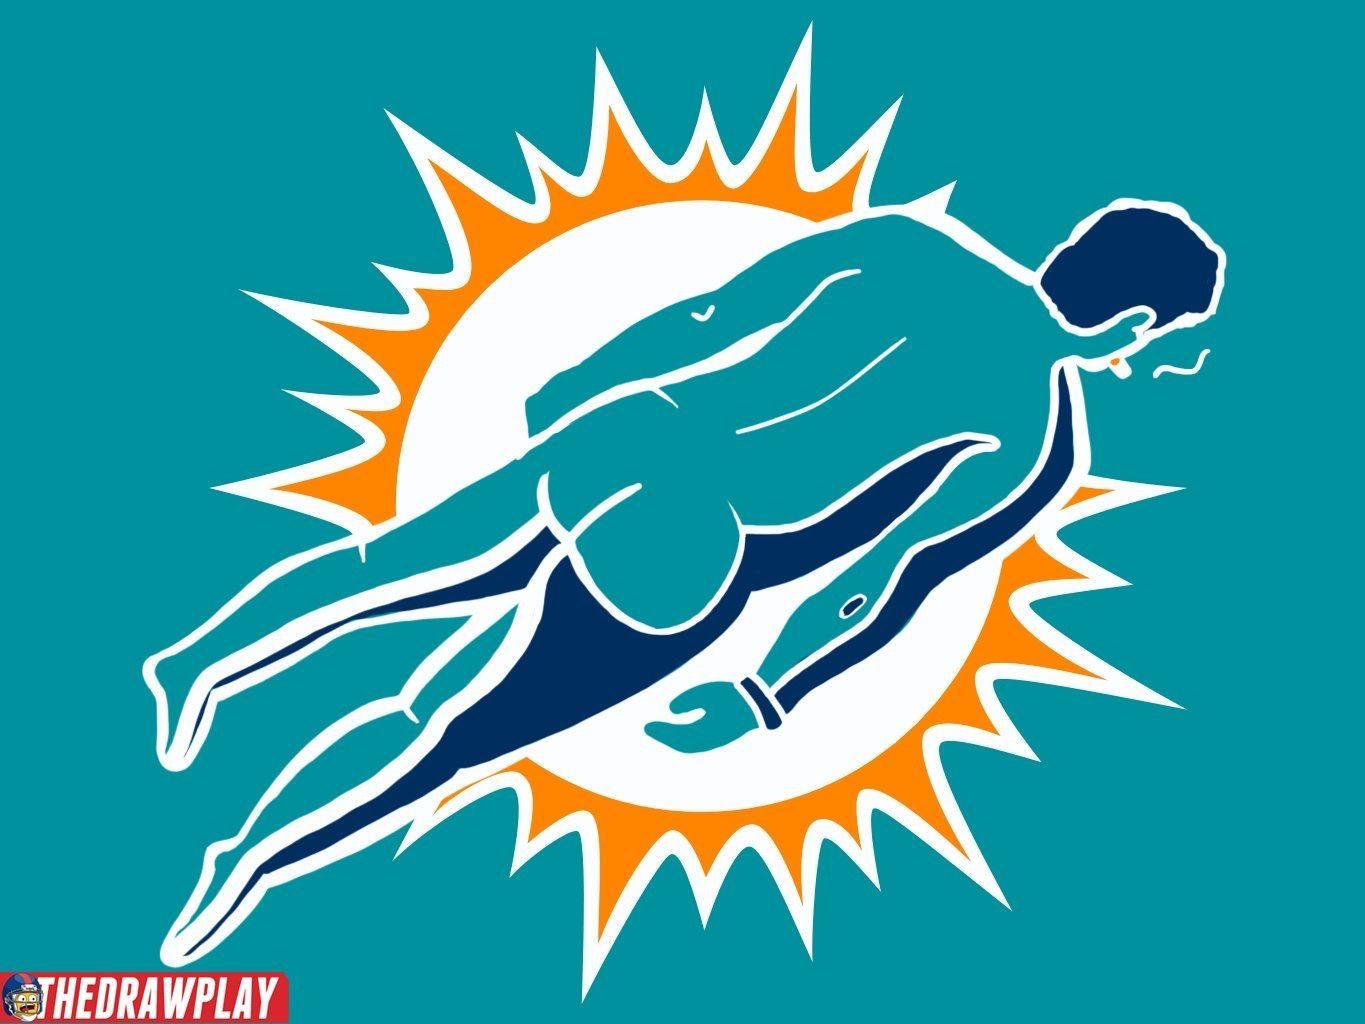 New Dolphins Logo - Love the new Dolphins logo - Imgur